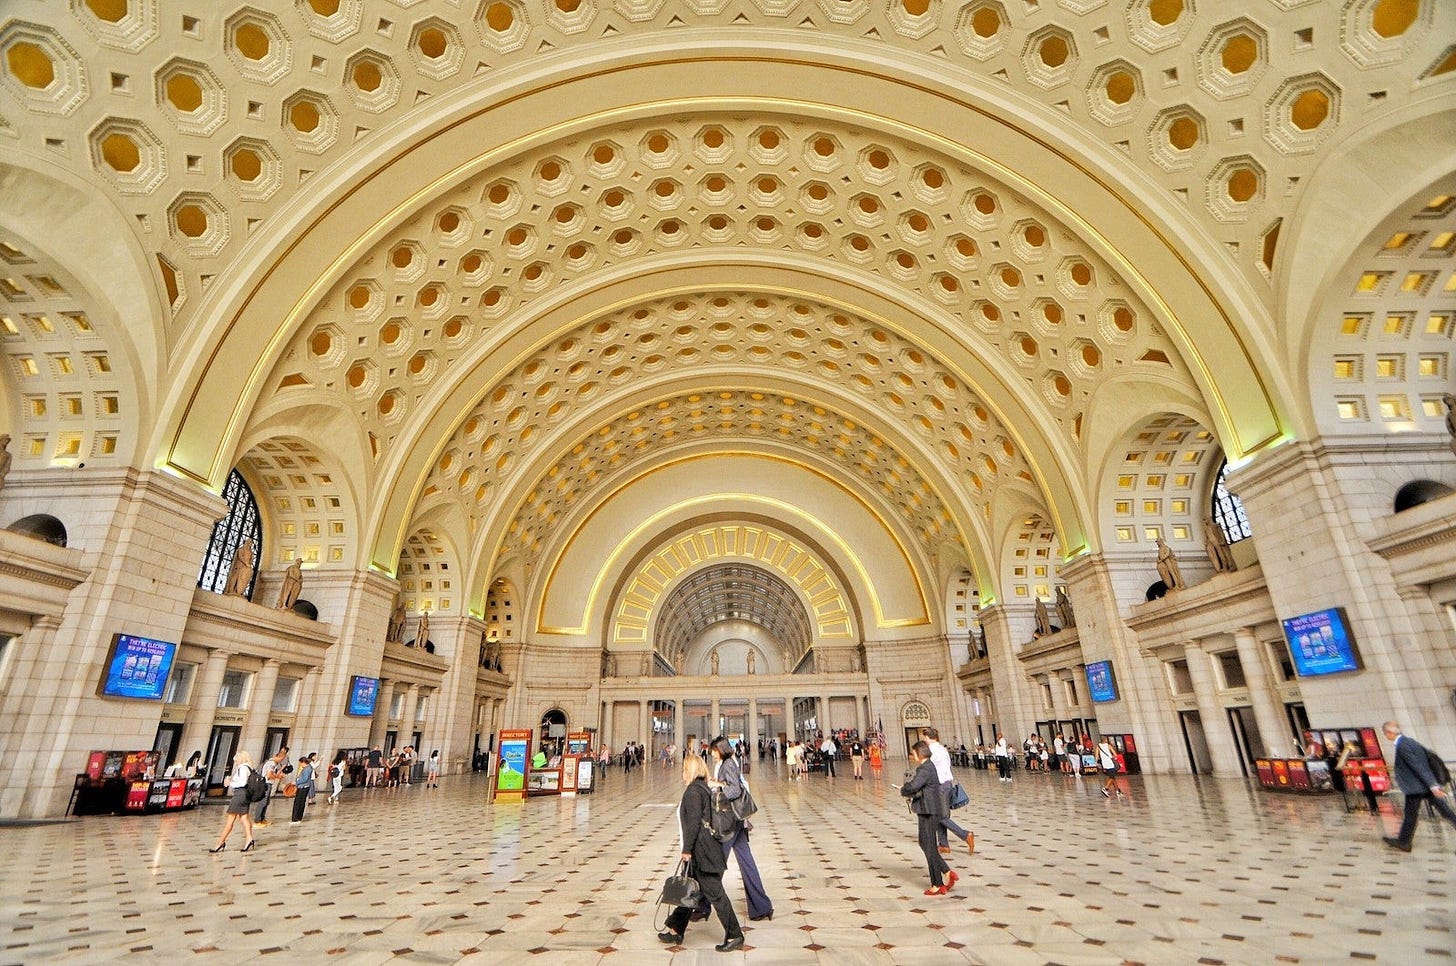 TPG's guide to Washington, D.C.'s Union Station - The Points Guy